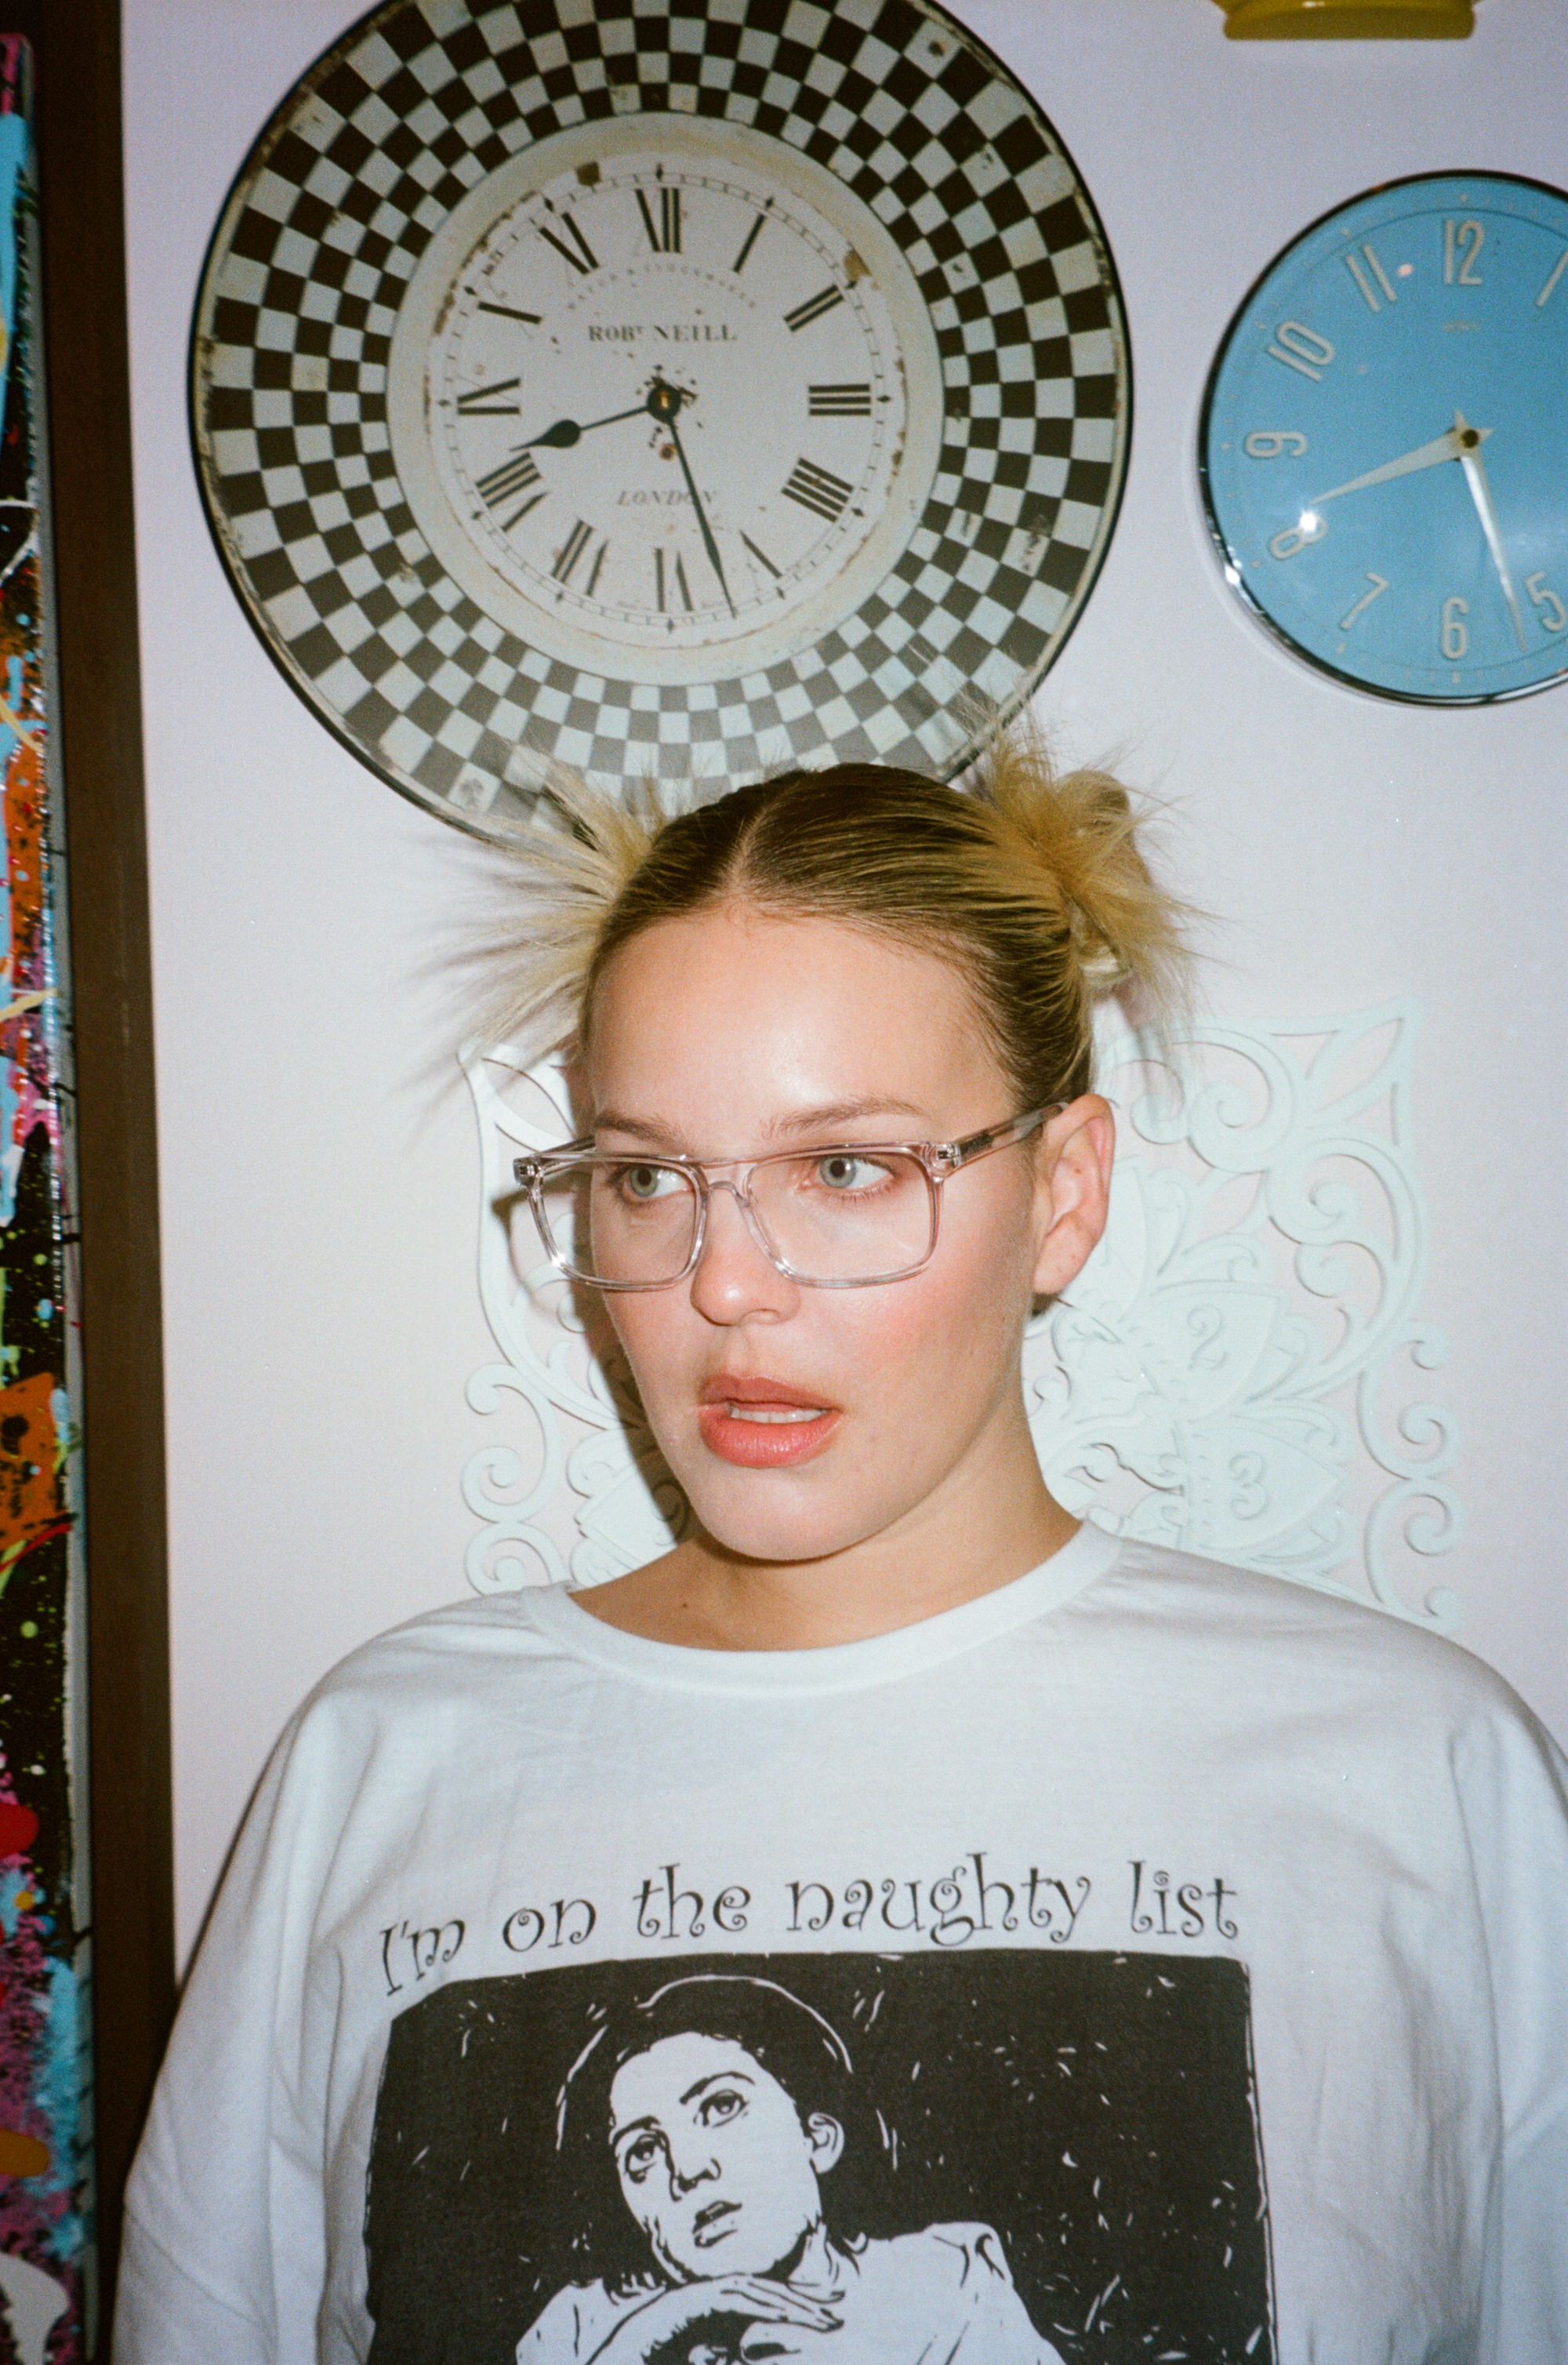 Anne-Marie has partnered with Specsavers to launch its new adidas Originals and Sport eyewear collection